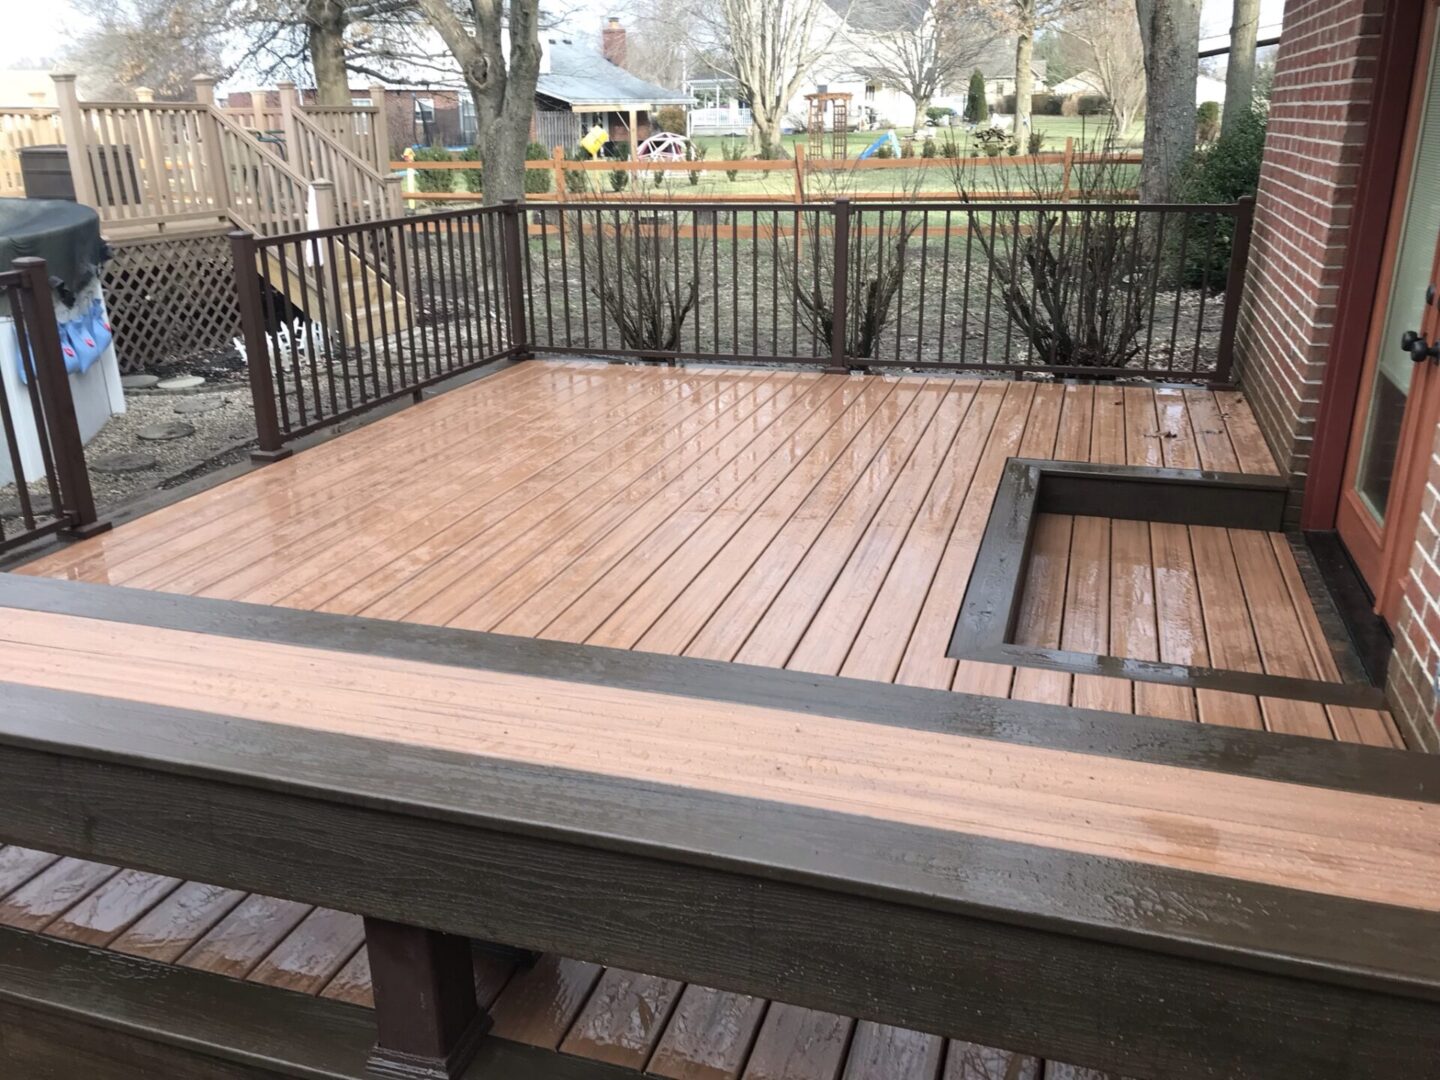 A wooden deck with benches and a fire pit.